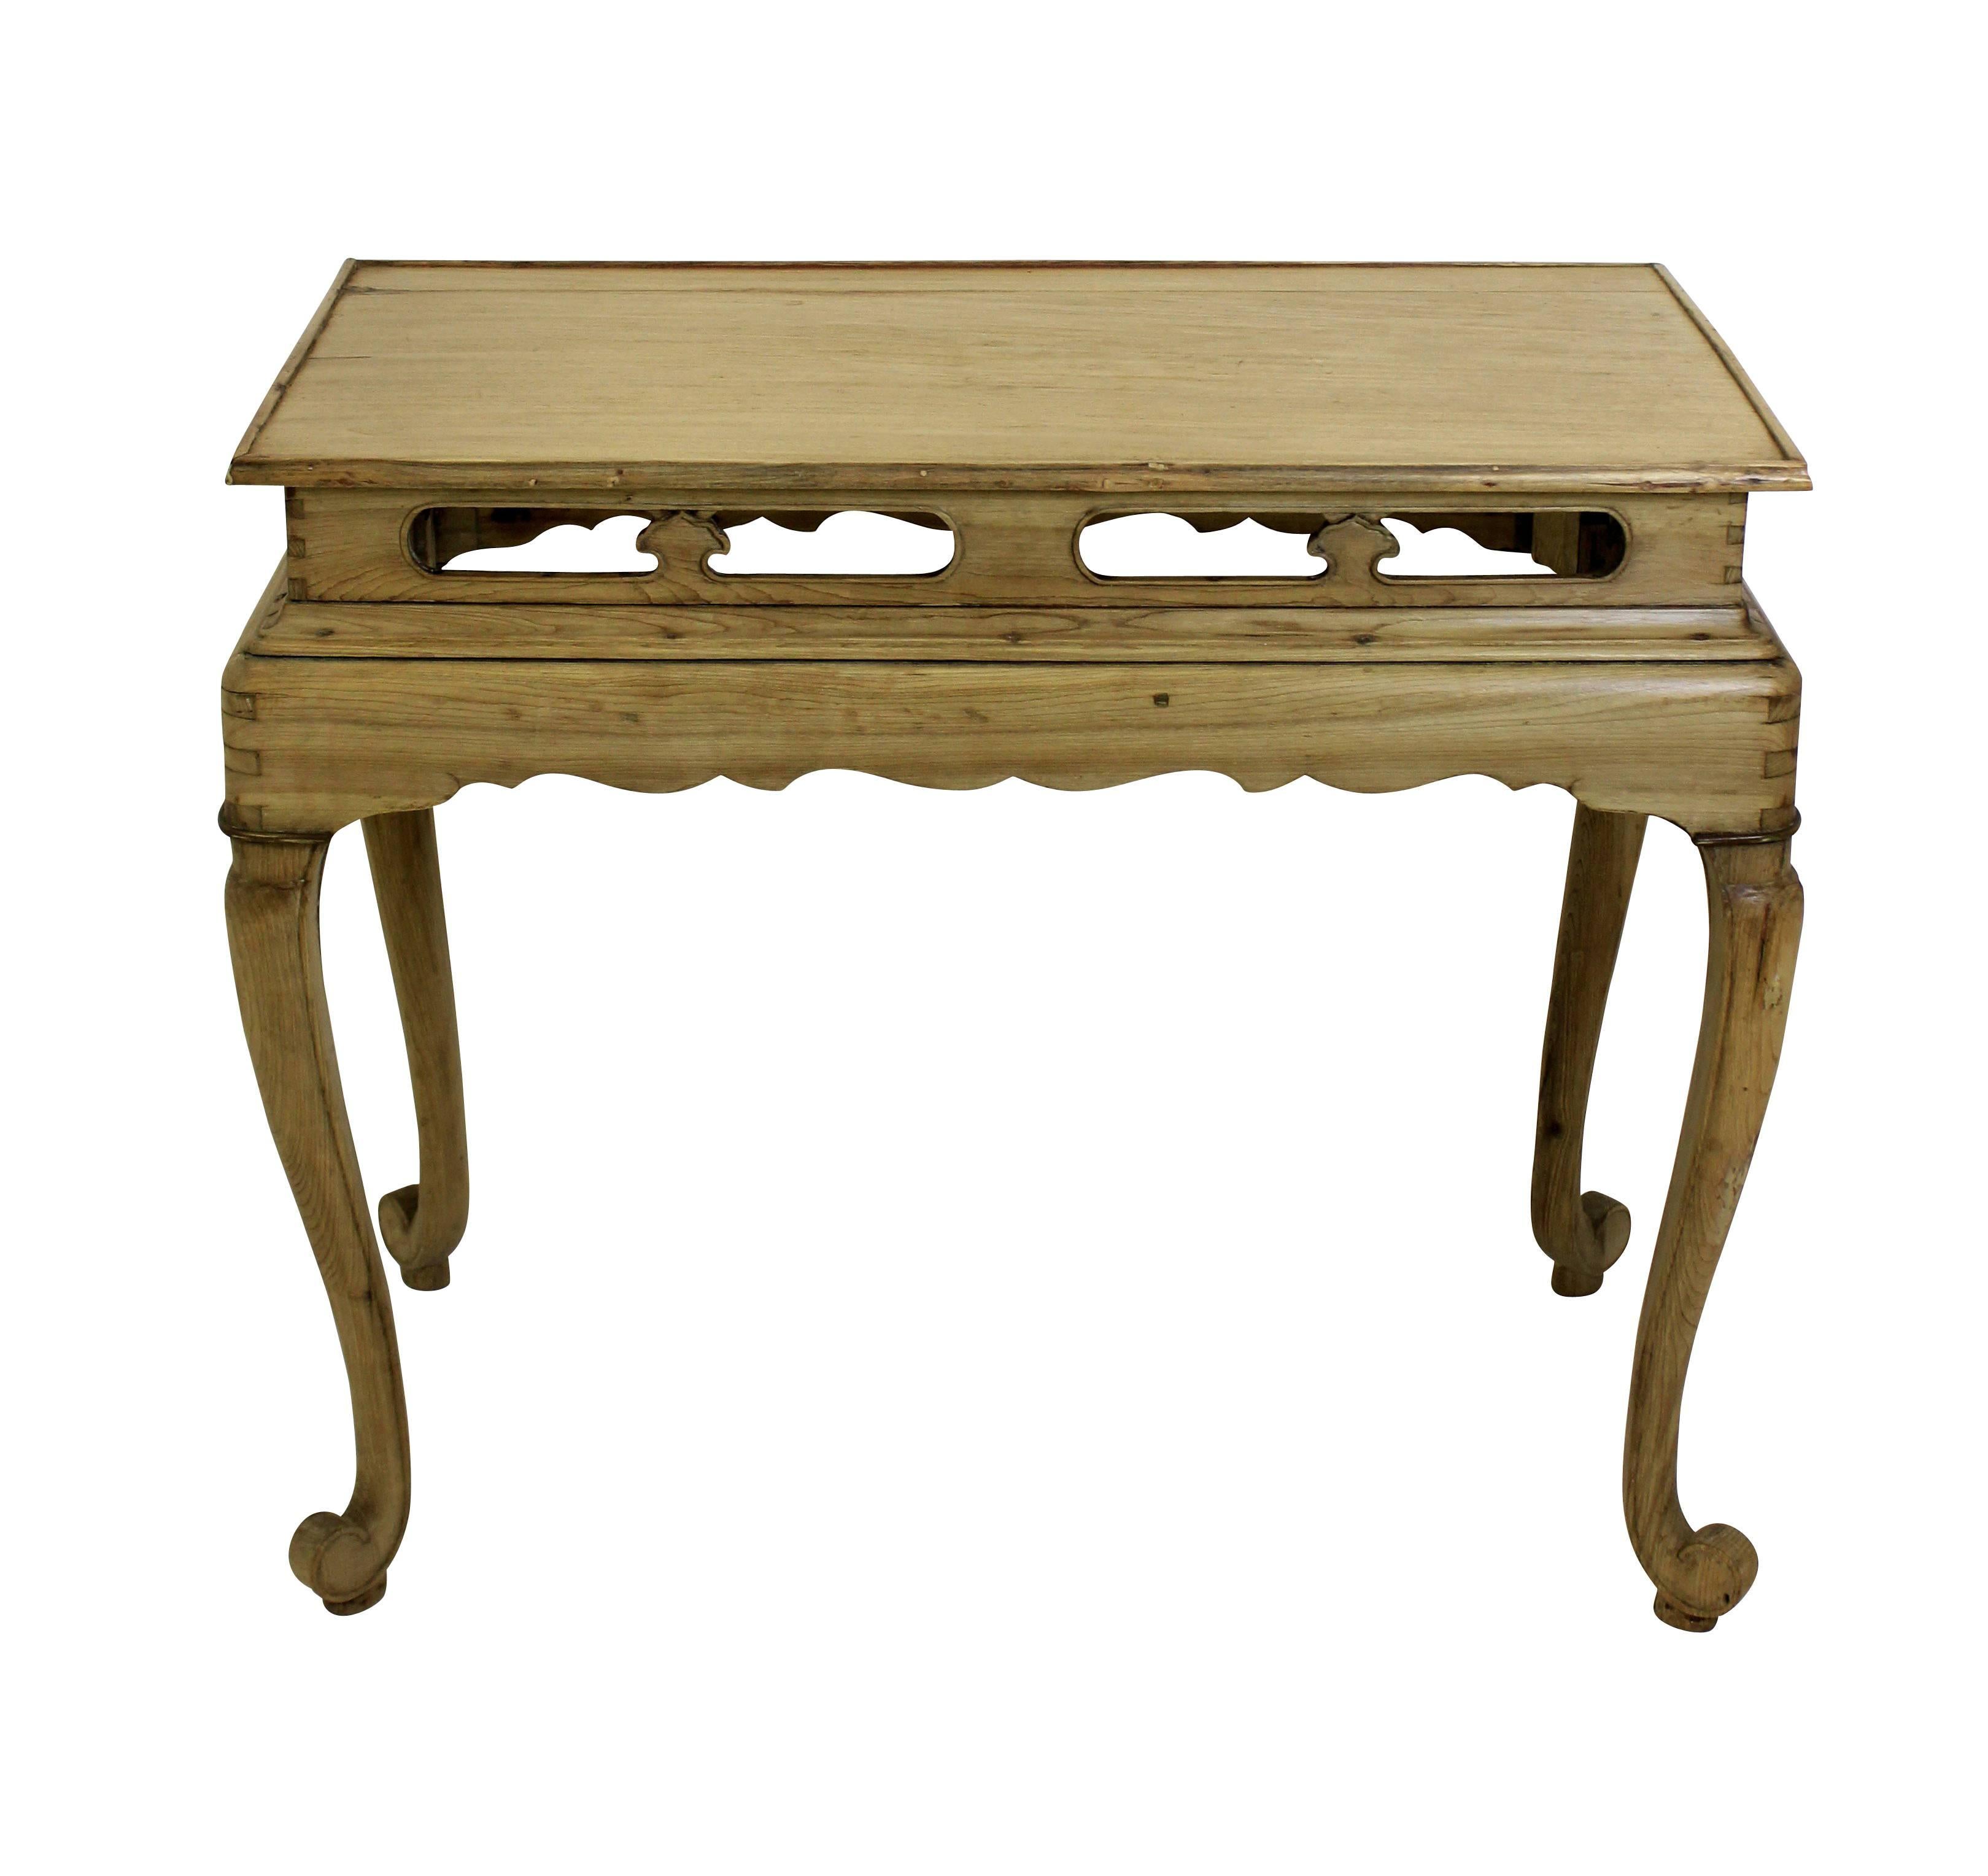 A Chinese stripped pine table of interesting design, with fretted panel frieze and cabriole legs.